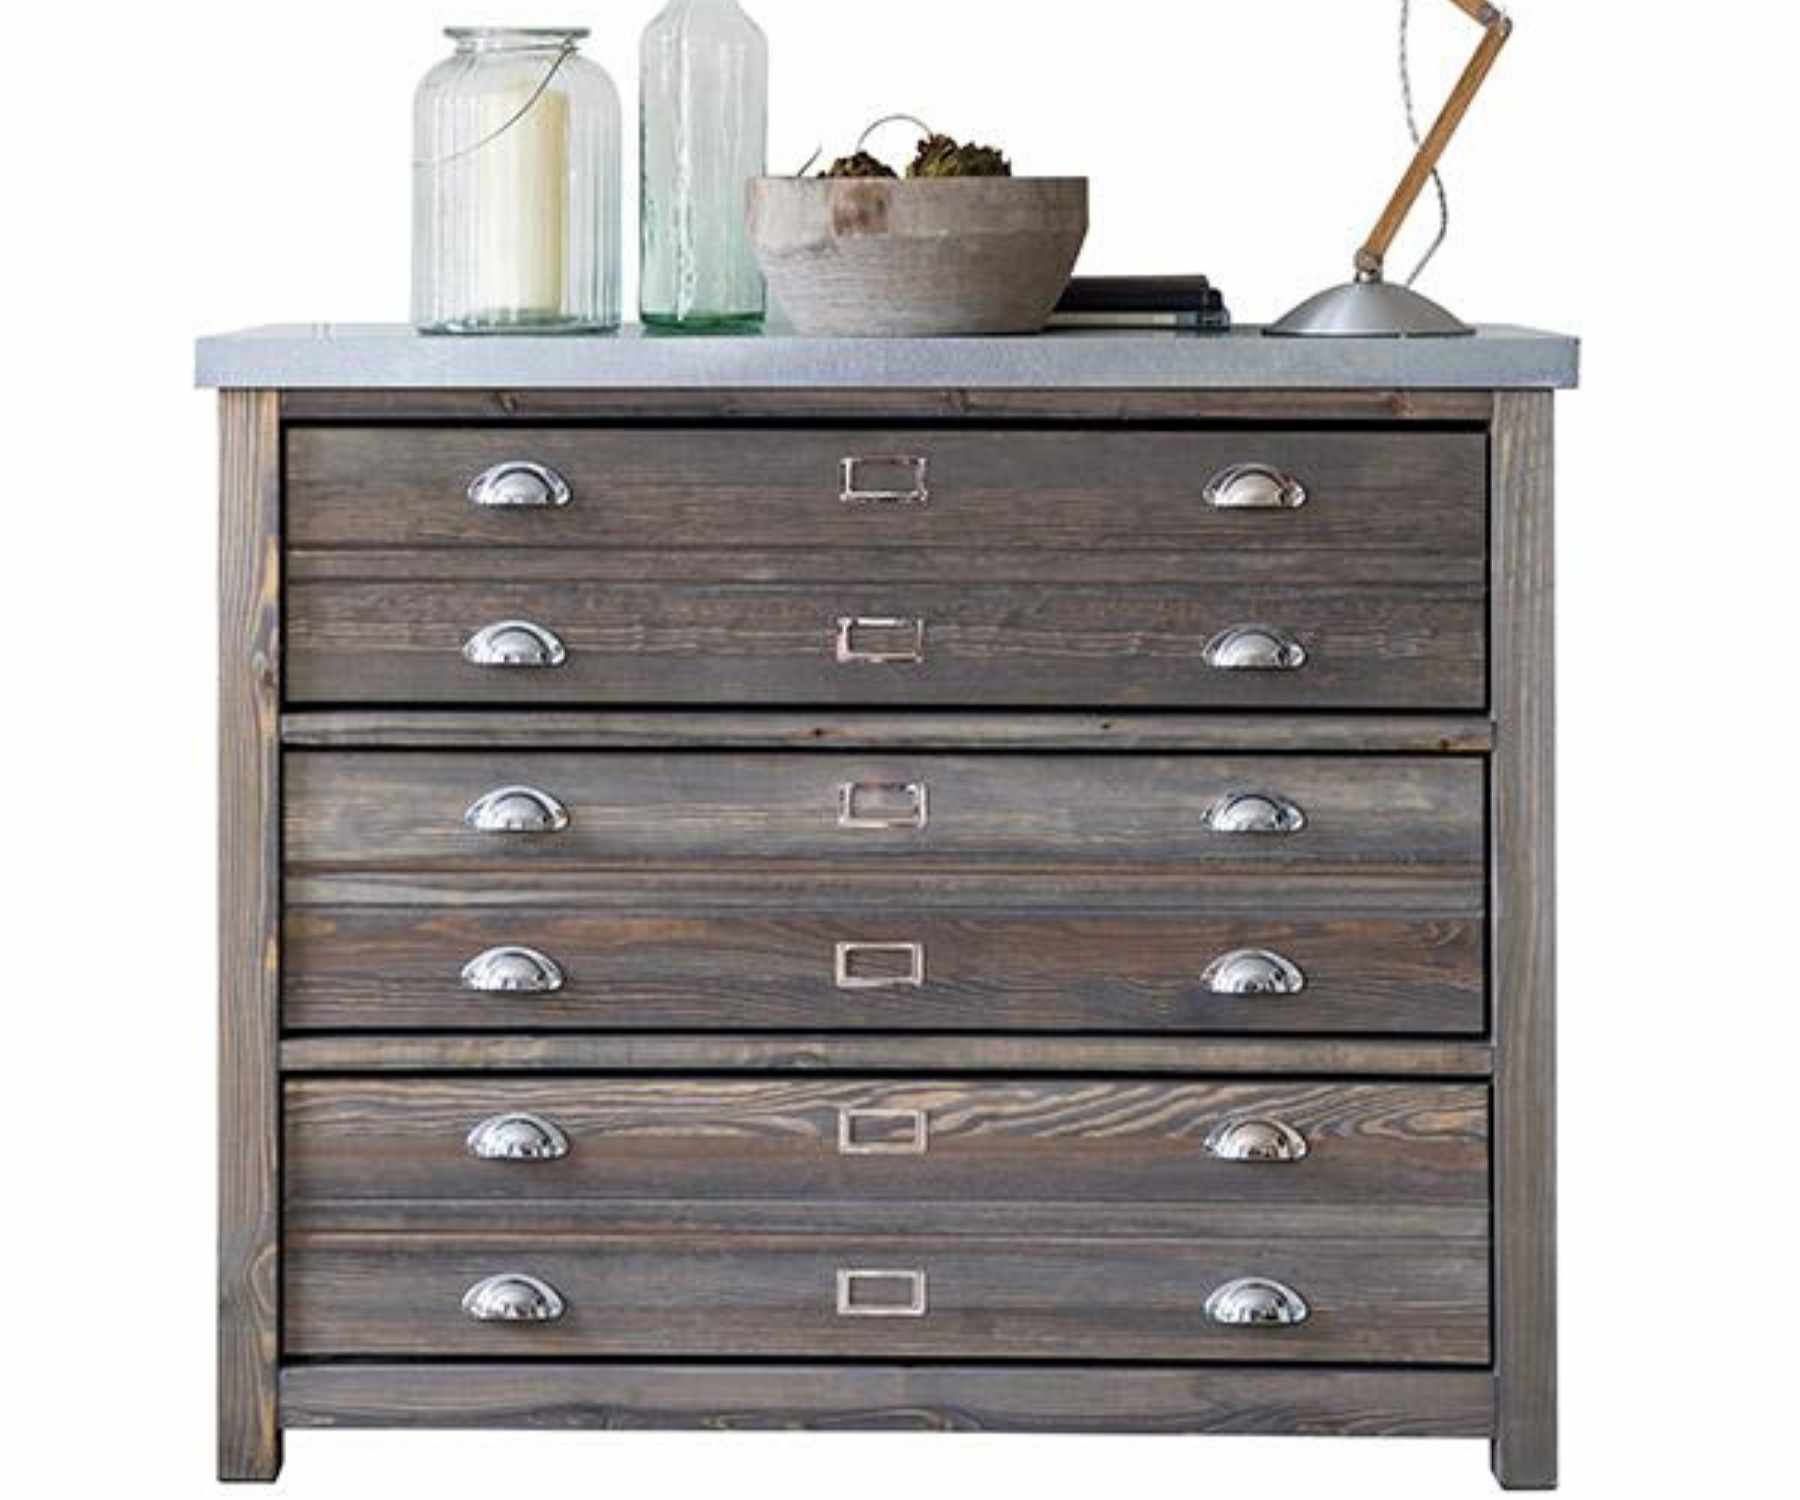 Zinc topped wooden chest of drawers